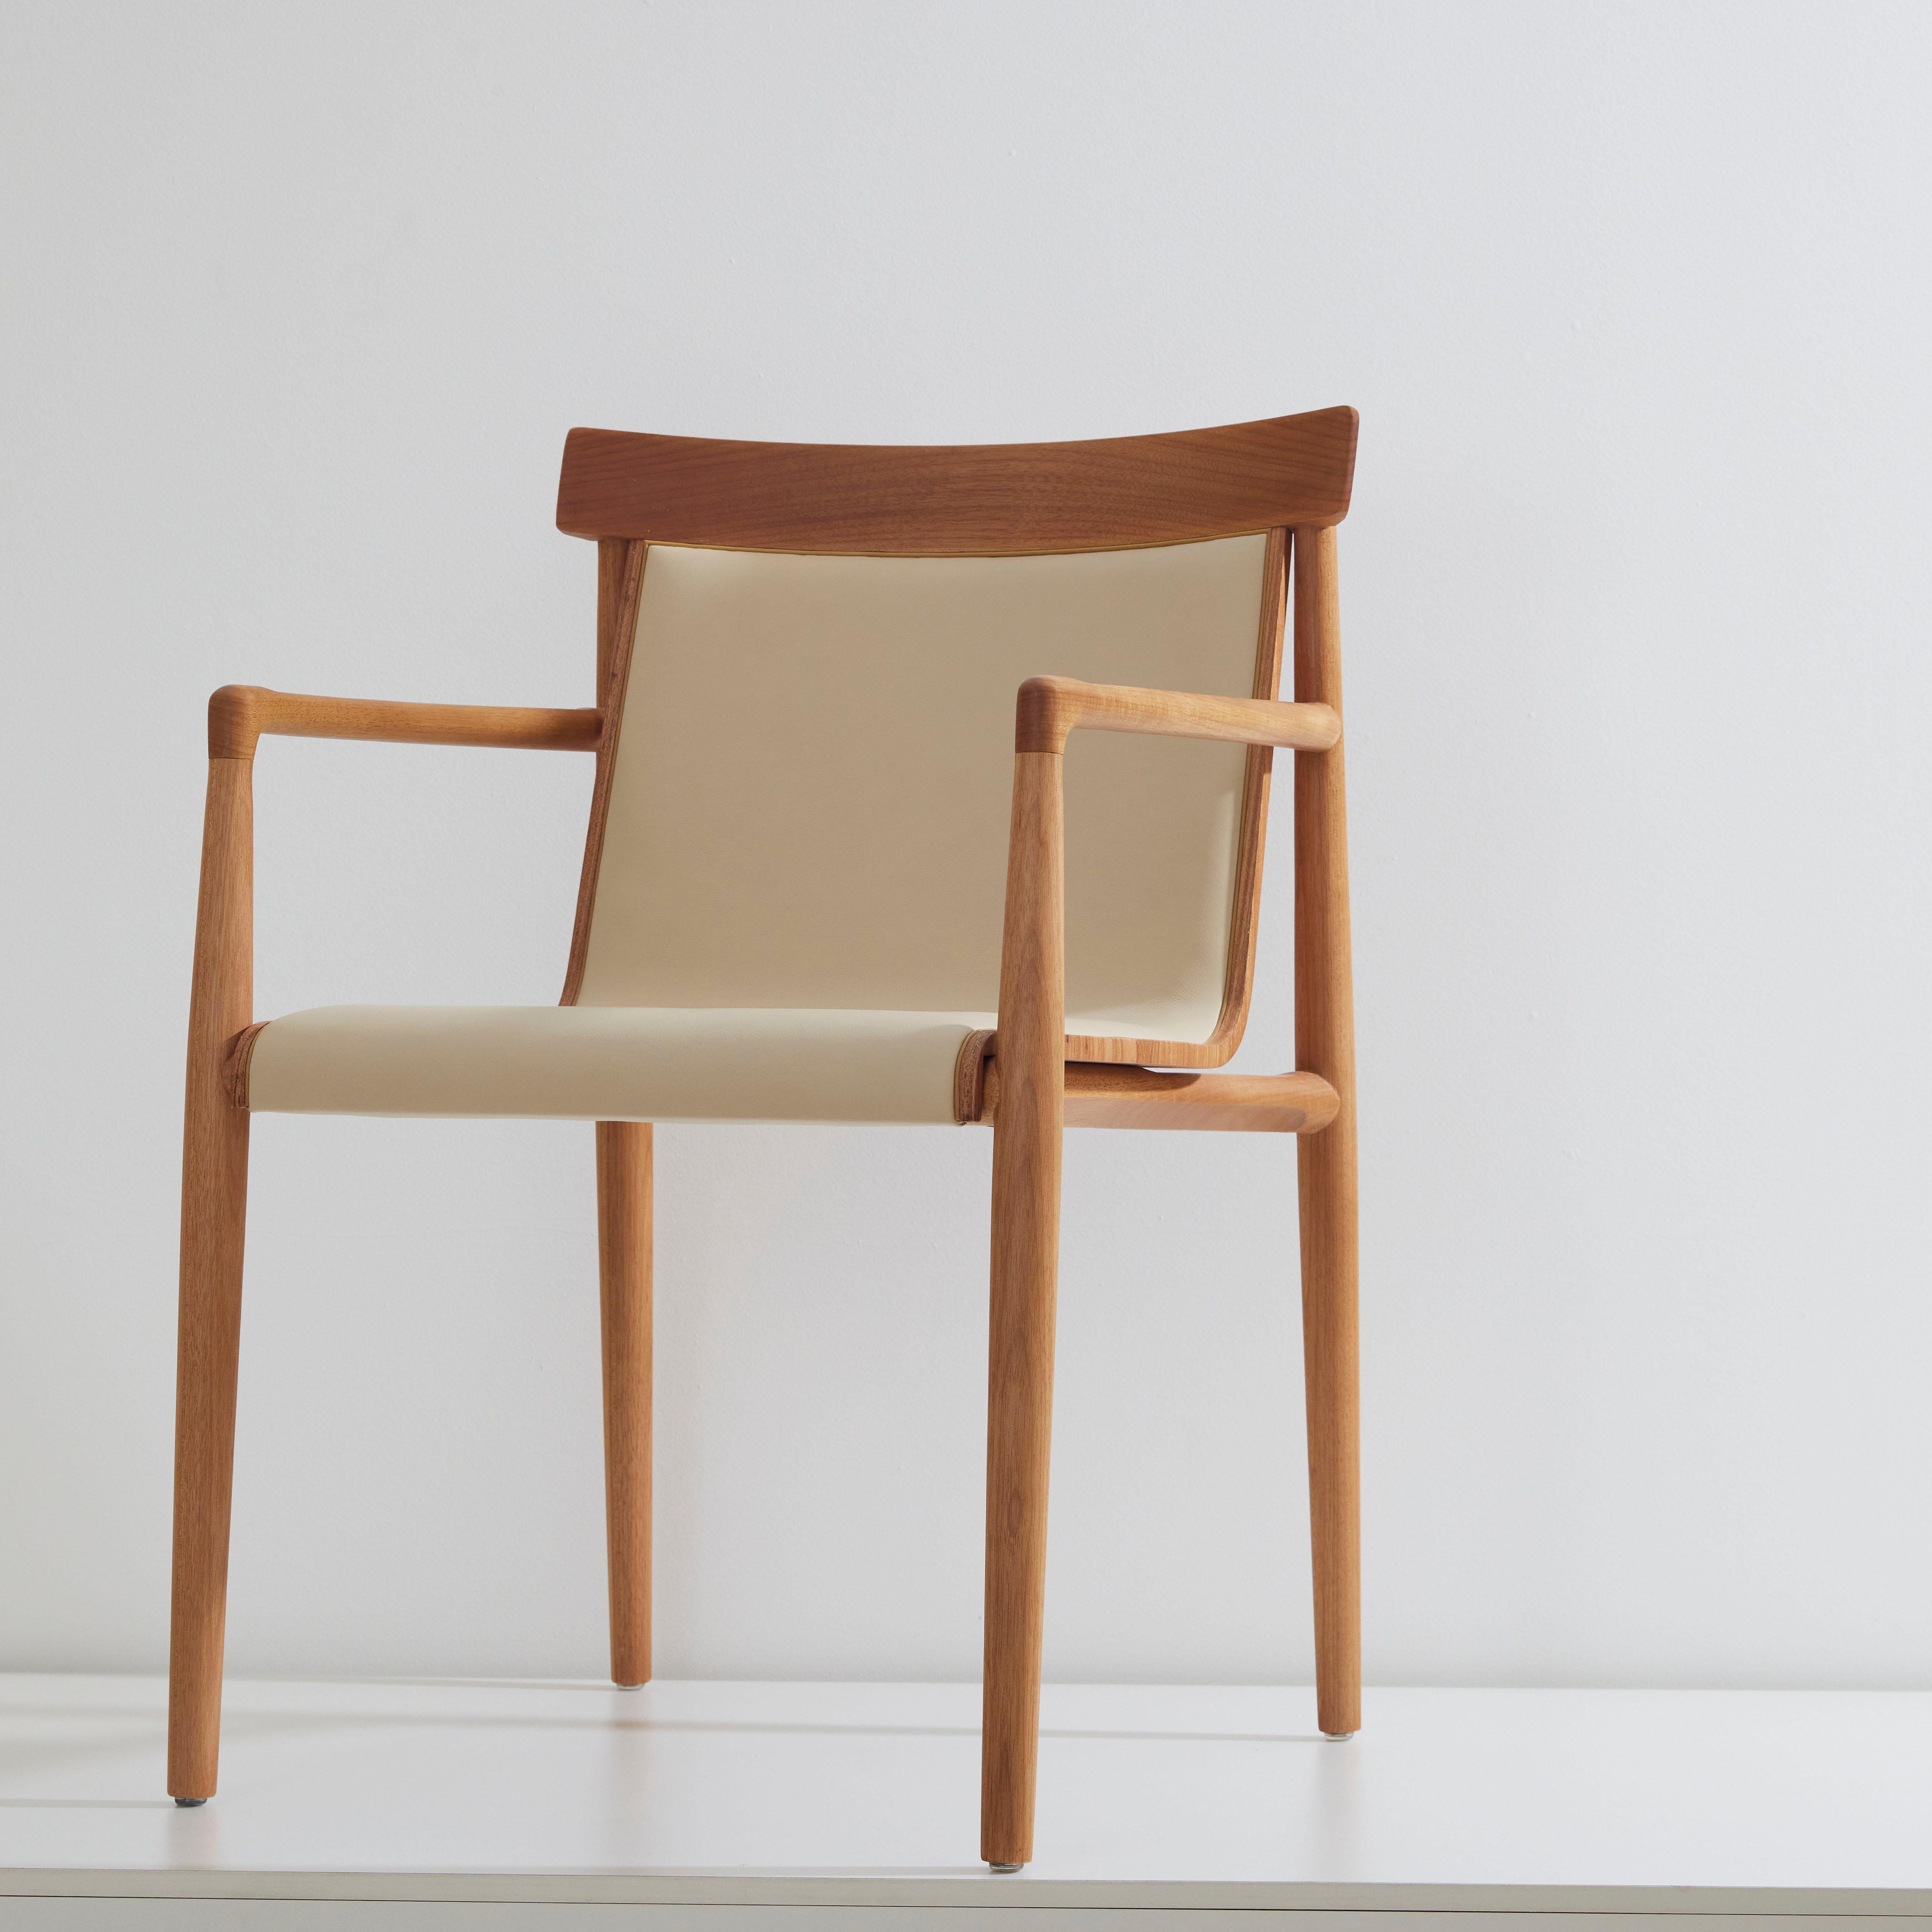 Dry chair collection.

The Dry chair concept is to work in a mixture of distinct references resulting in a modern classic in a dance between the retro and the modern. A heavy and in depth wood work is put to the structure to create interesting